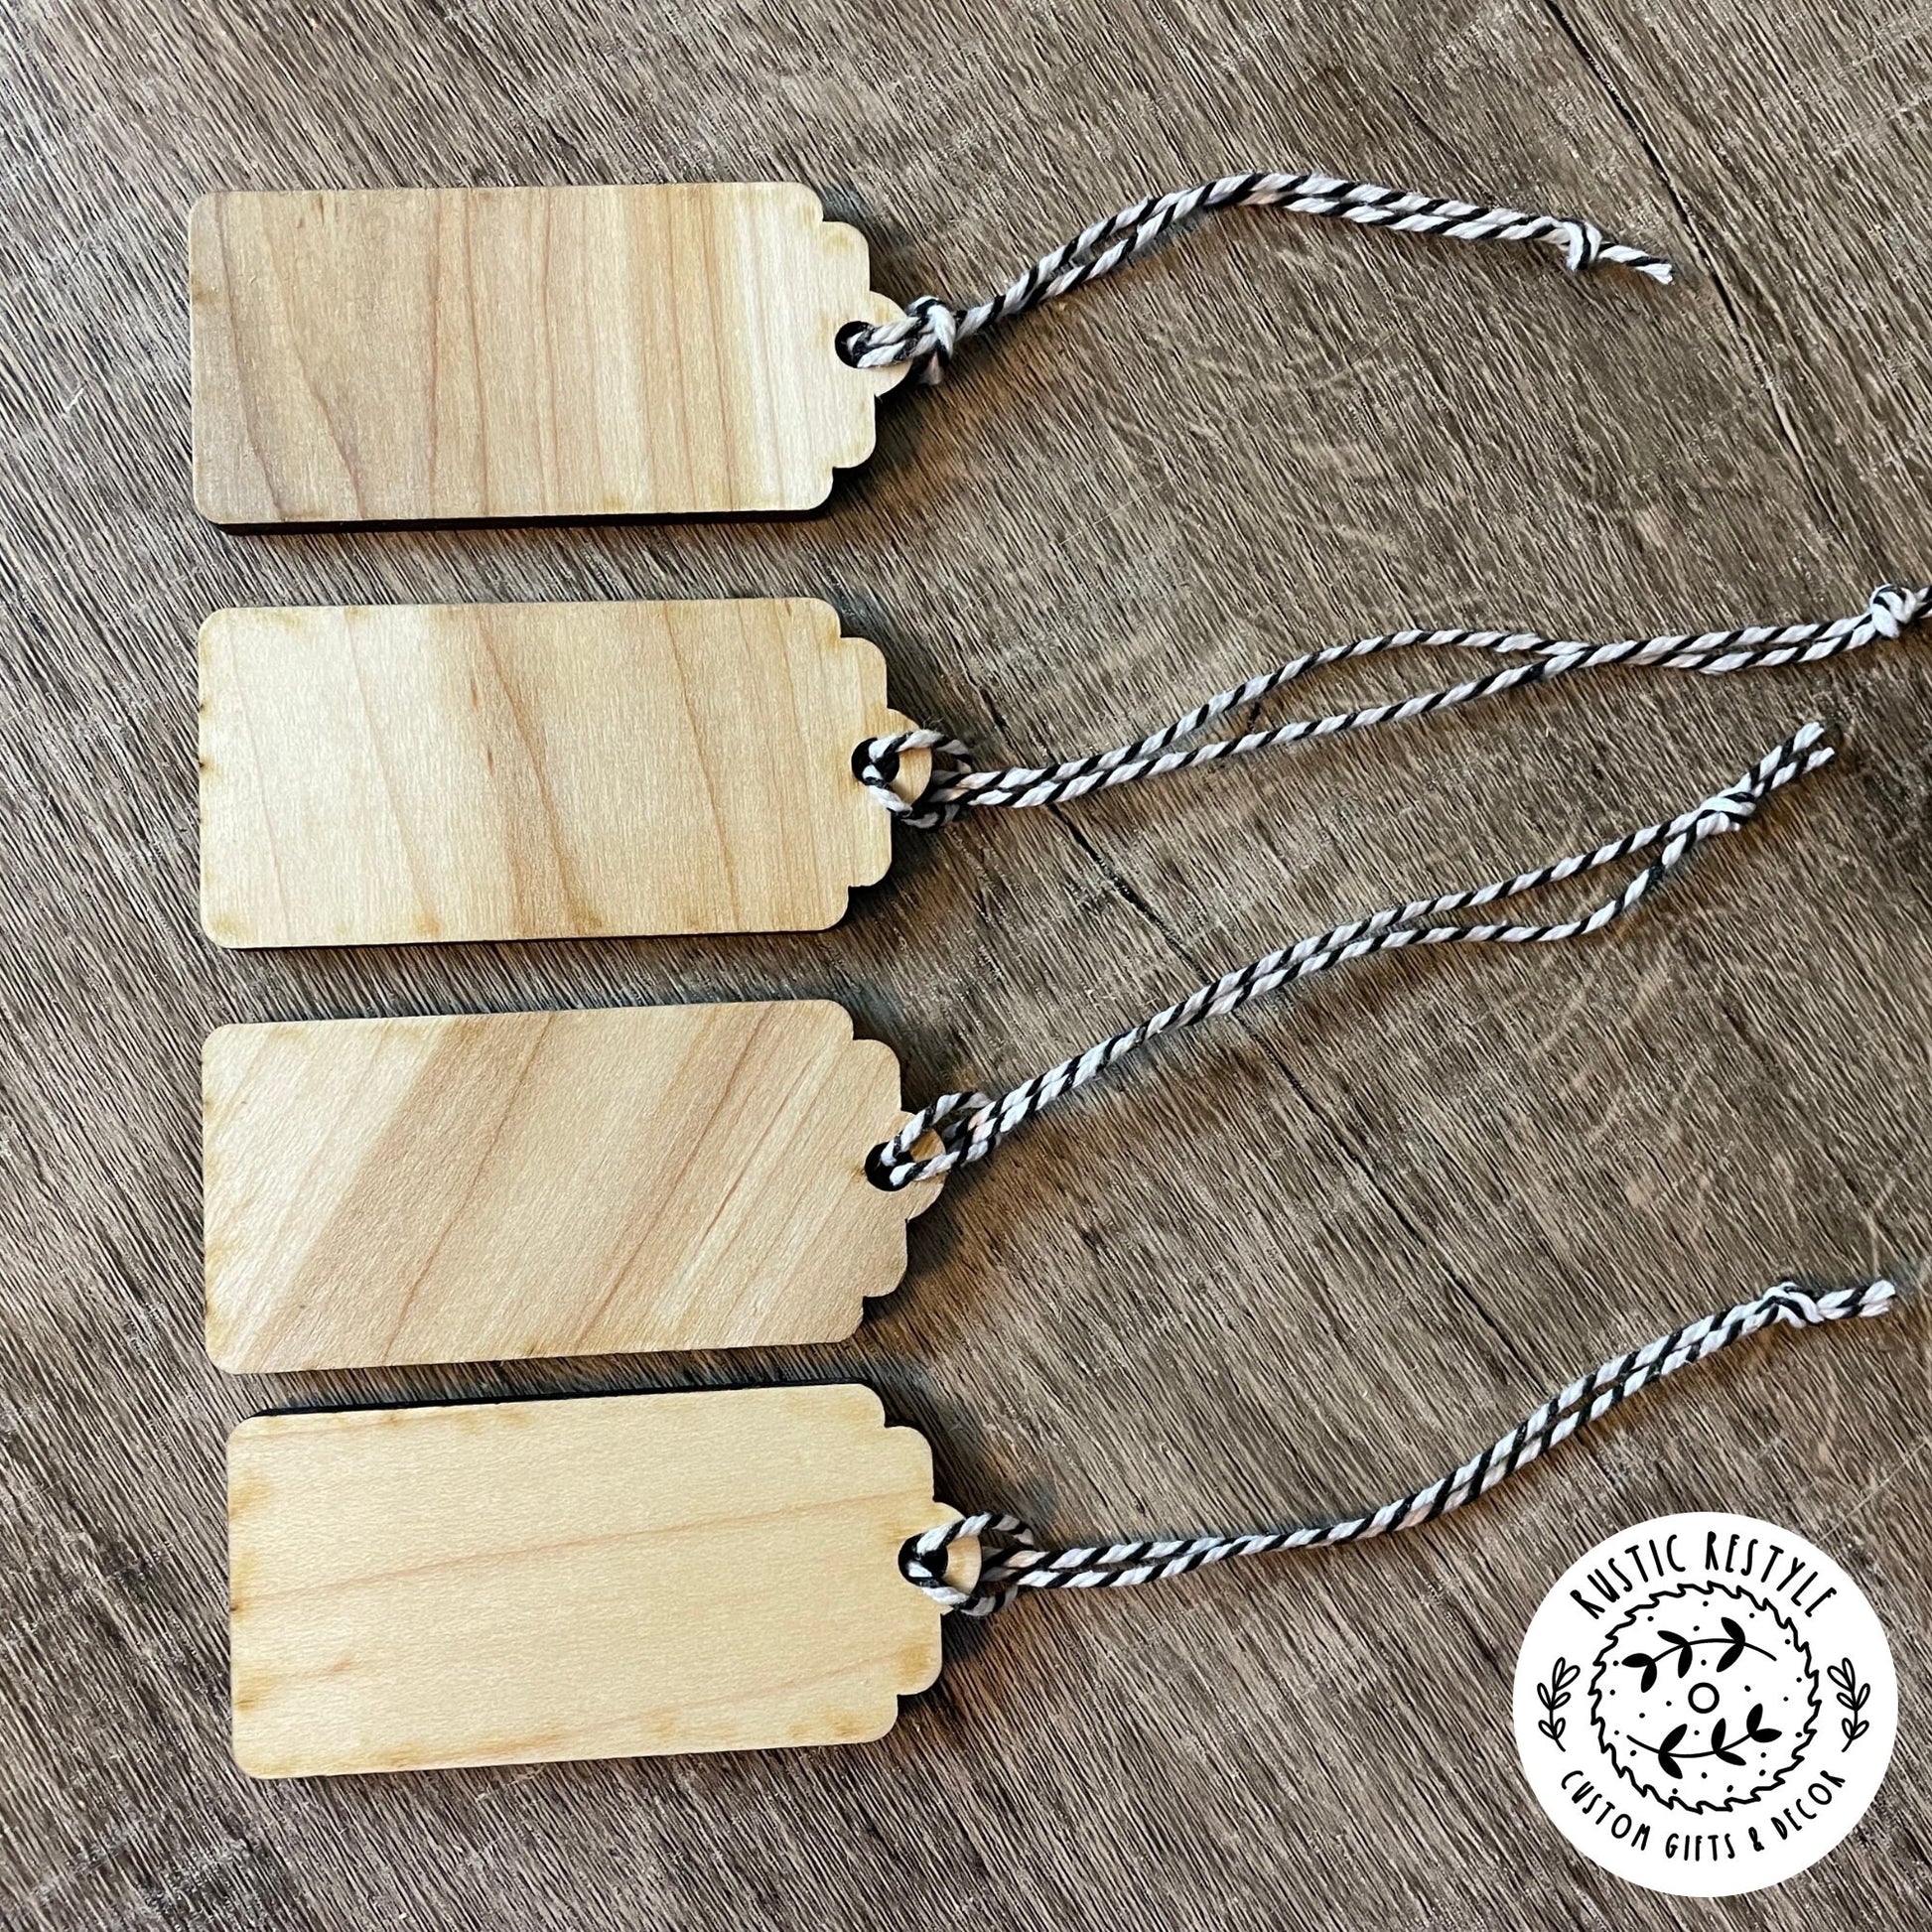 4 Christmas gift tags laying on a wooden table. This photo shows the back side of the tags all blank with wood grain. Each tag has a black and white bakers twine string.